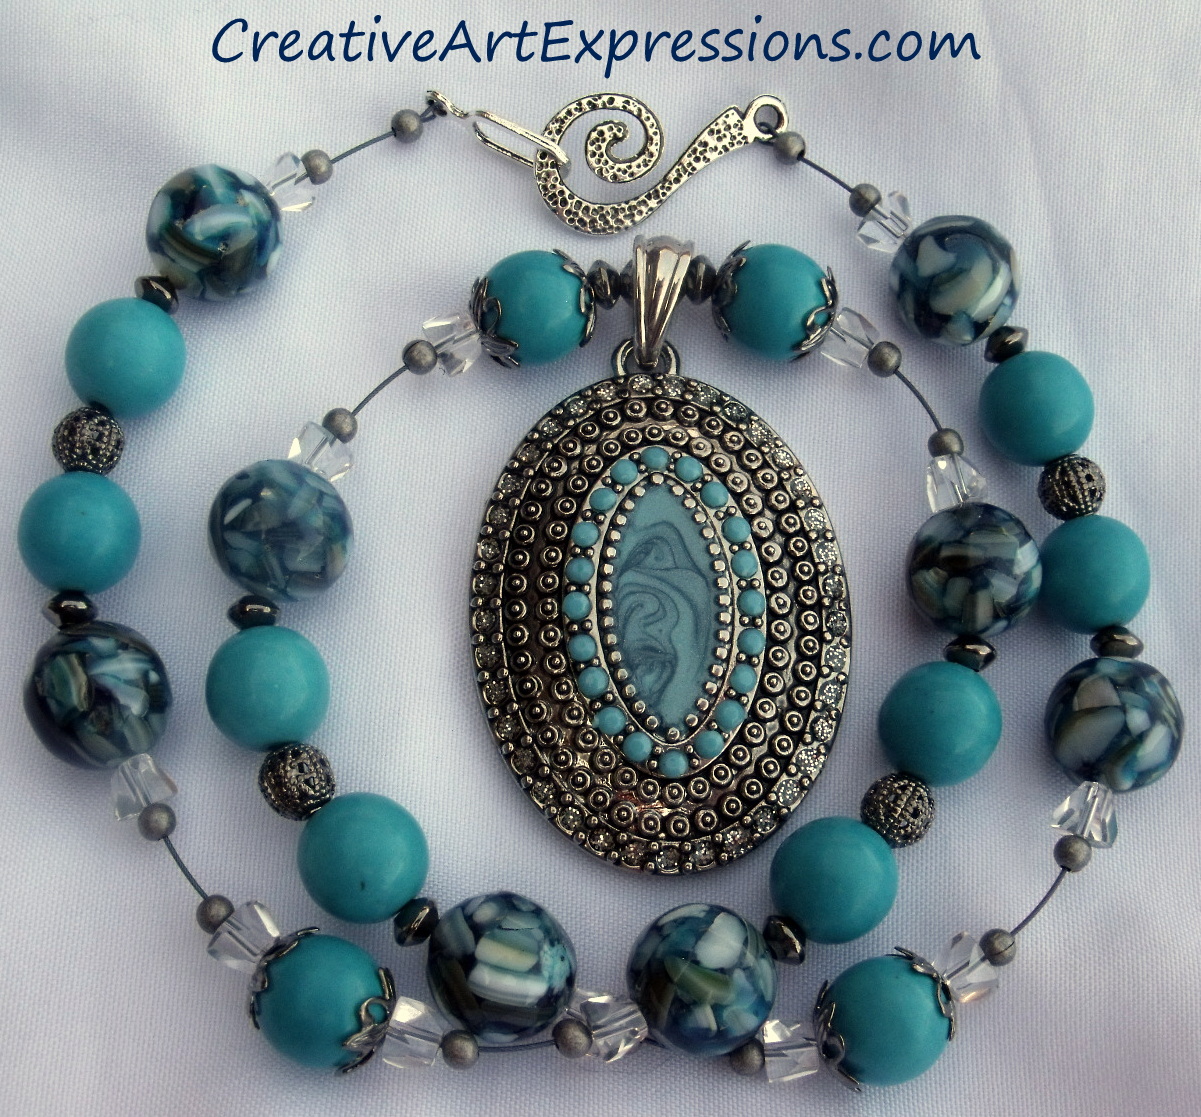 Creative Art Expressions Handmade Turquoise & Silver Necklace Jewelry 